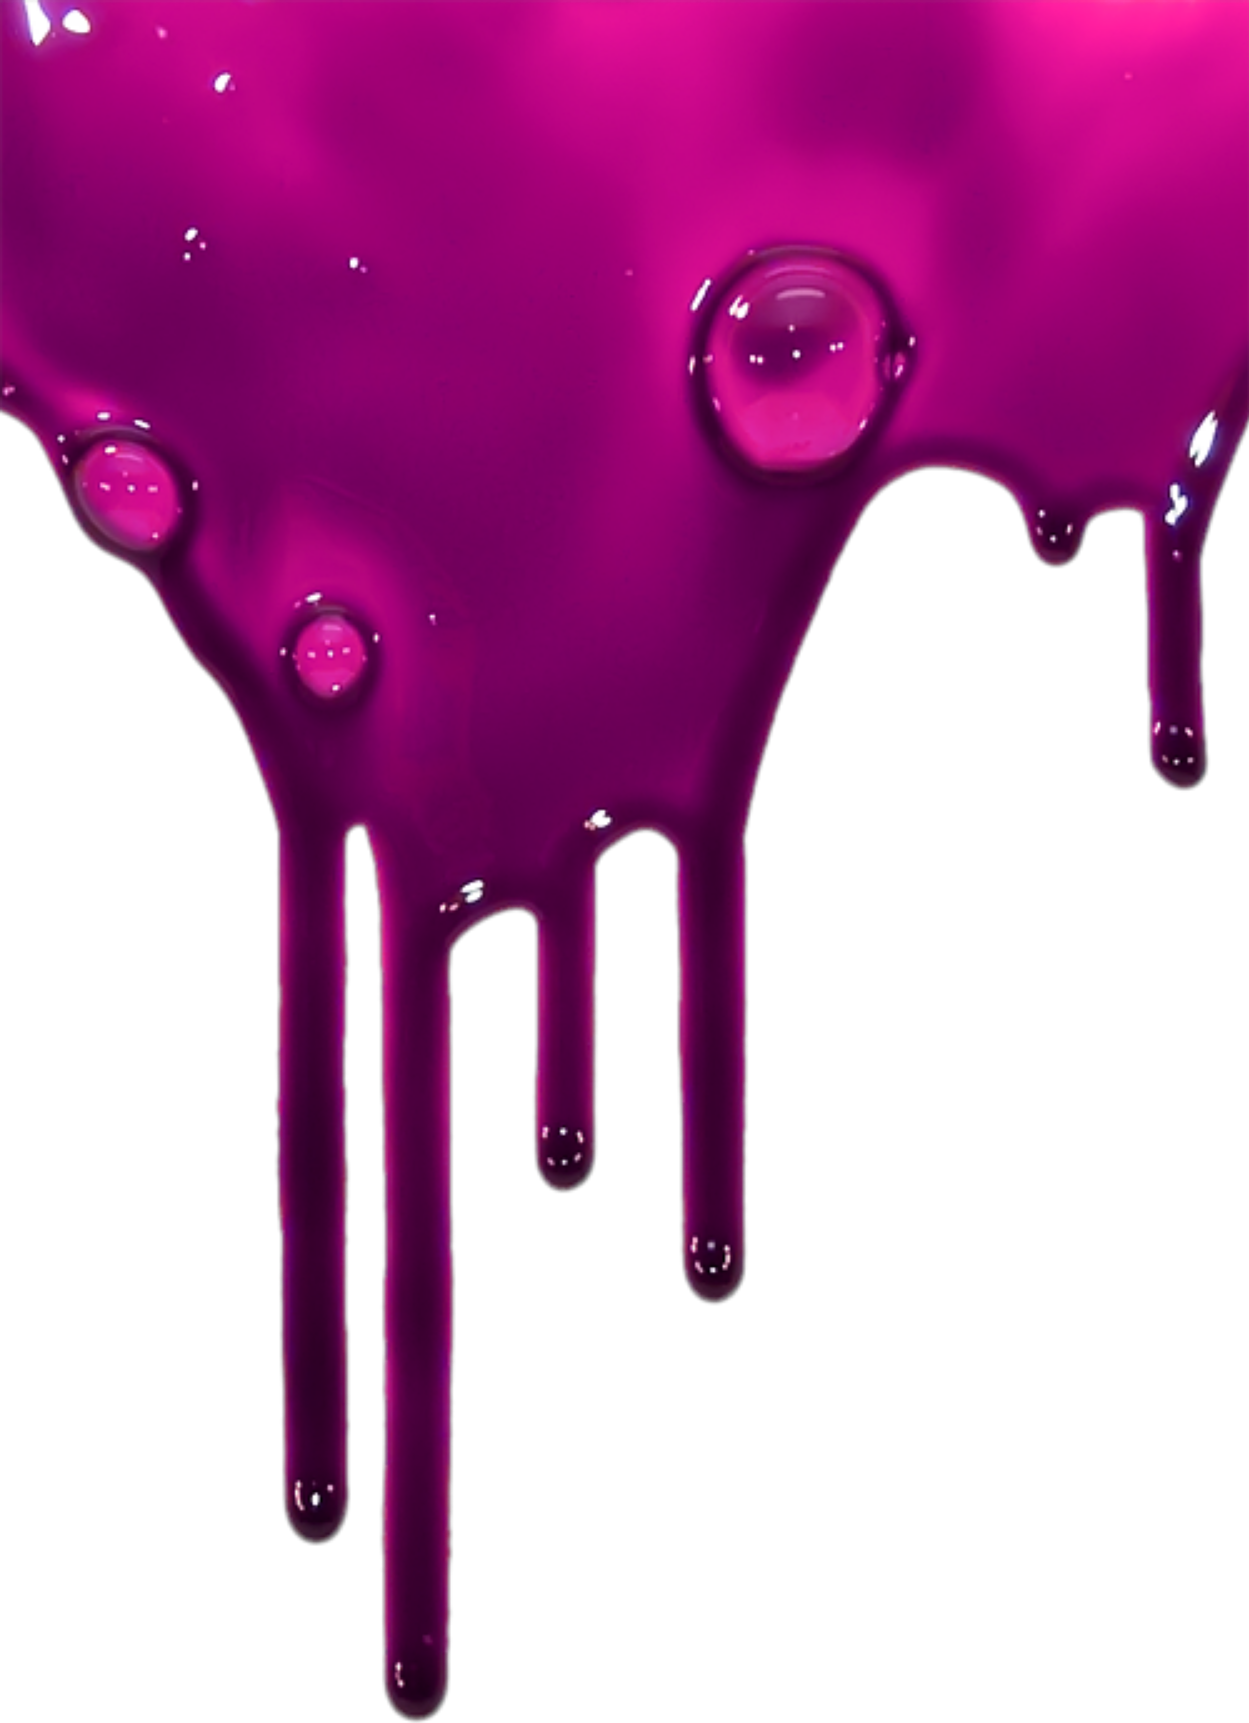 This visual is about drip melting art sticker freetoedit #drip #melting #ar...